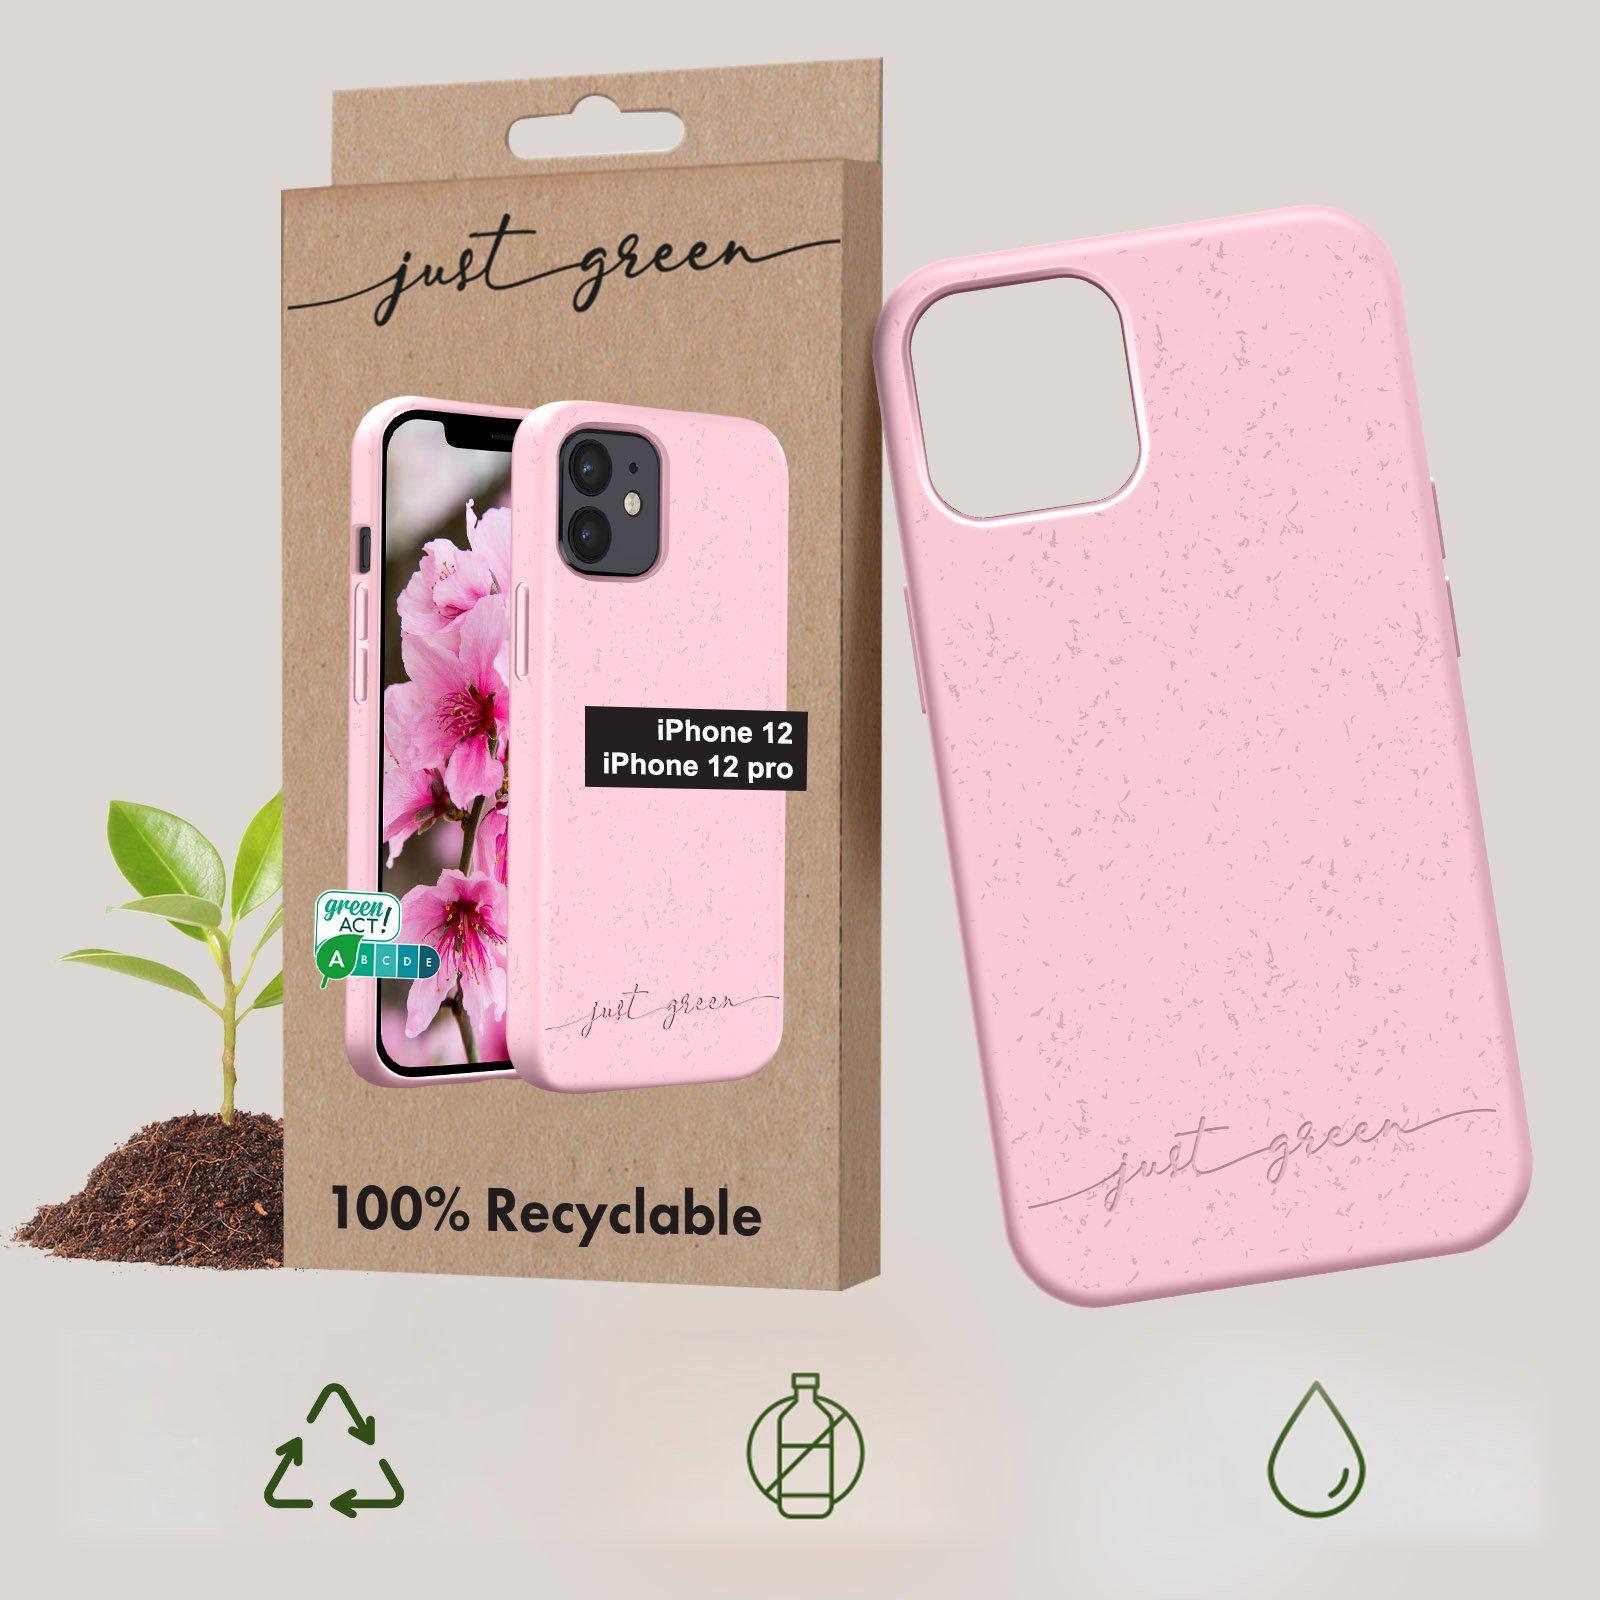 Just green  Coque iPhone 12 et 12 Pro Recyclable 